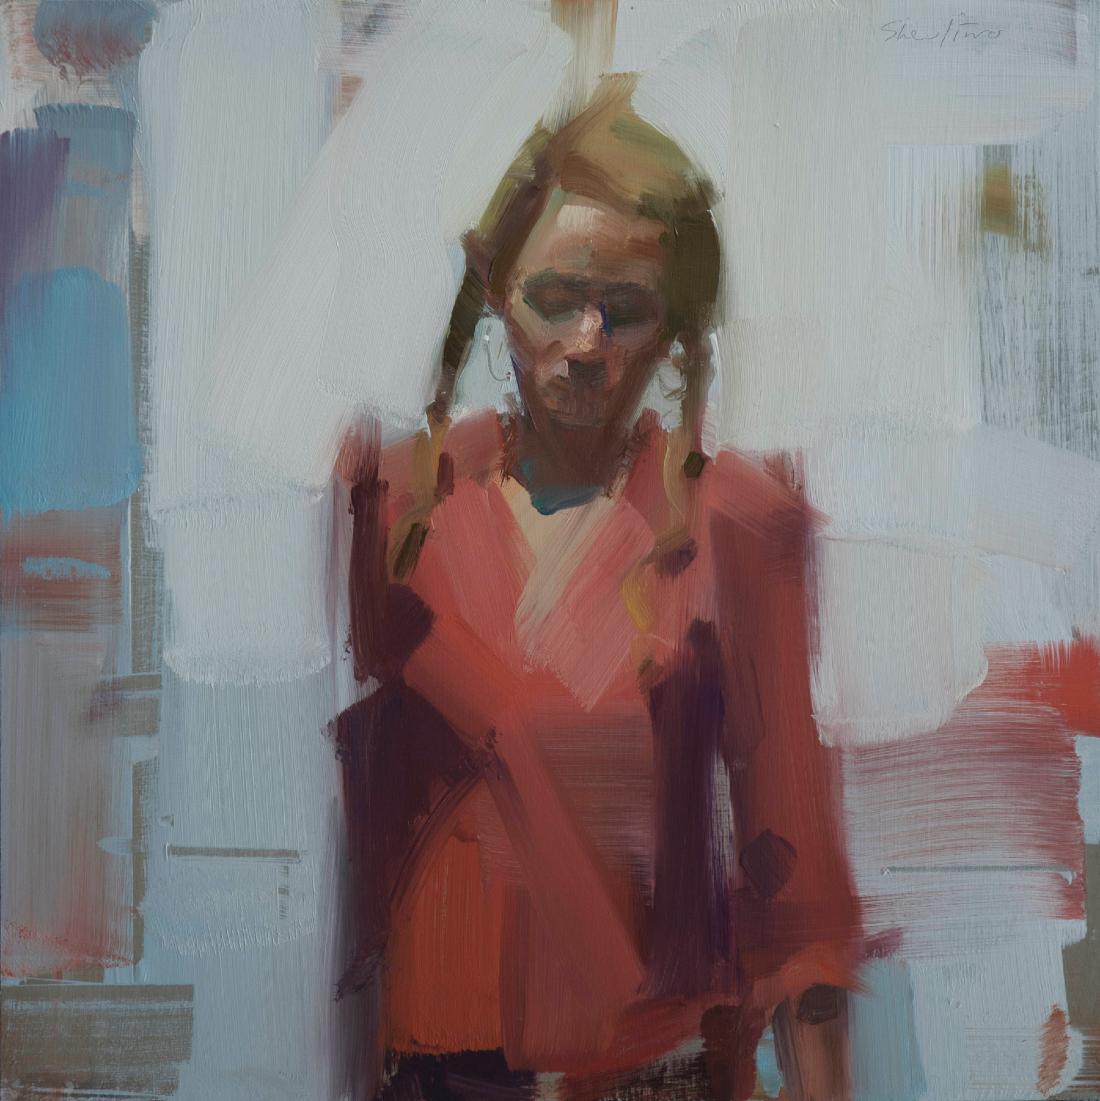 David Shevlino Portrait Painting - Diane with Braids  Oil on Panel  Figurative Painting  Contemporary  